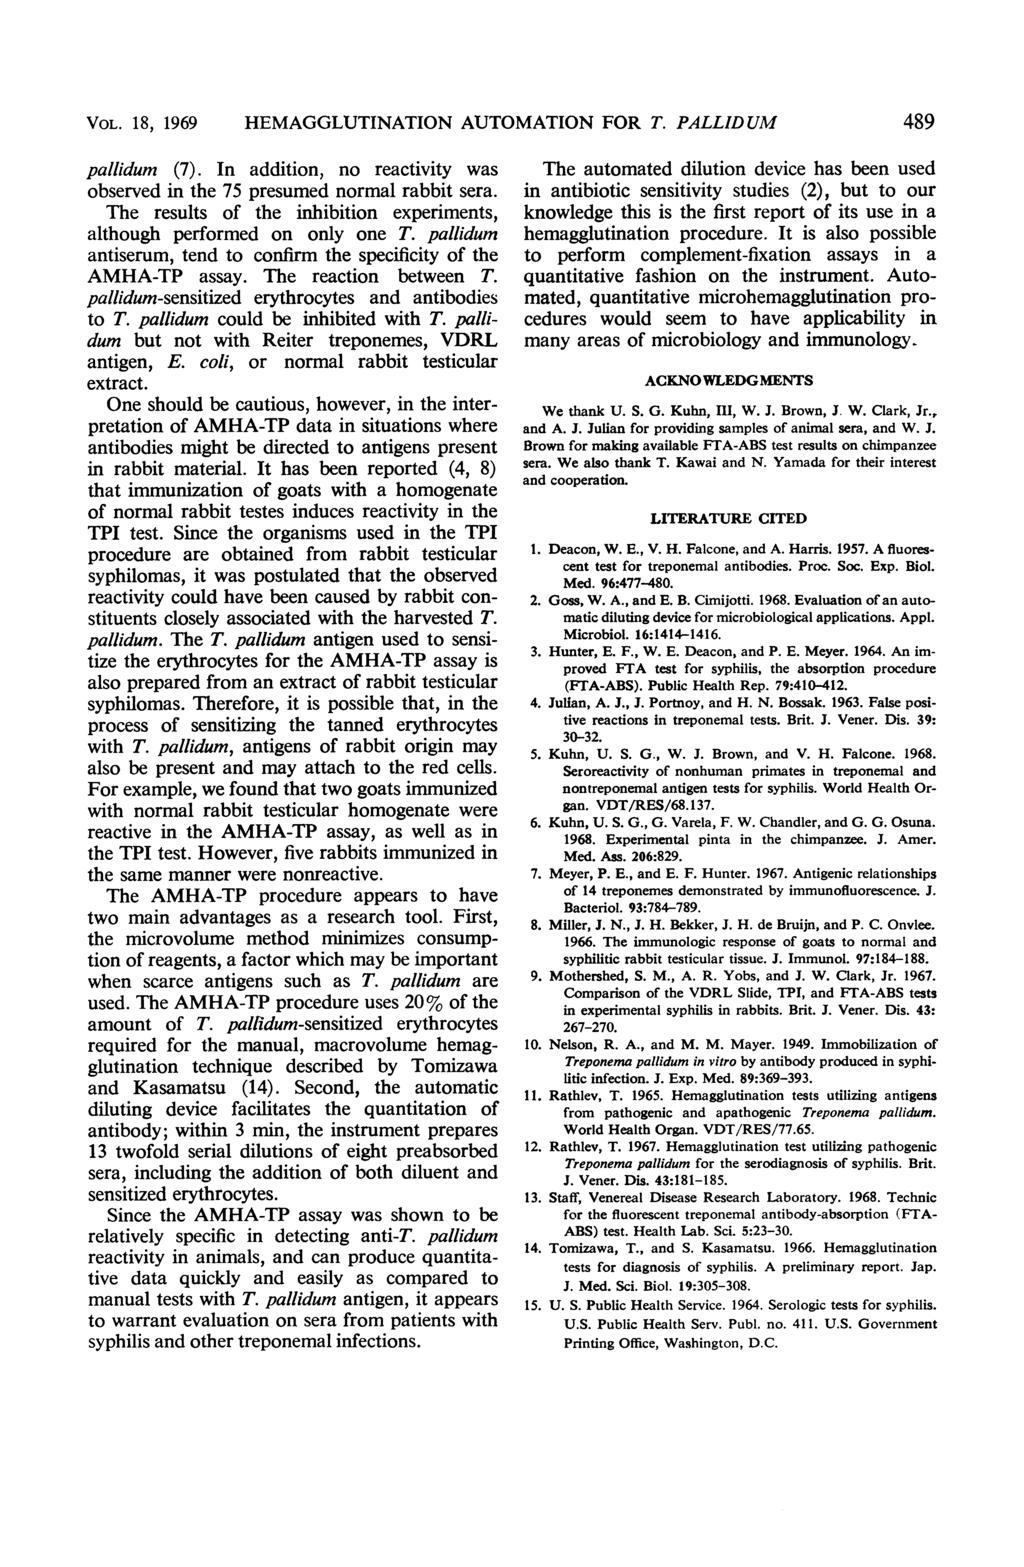 VOL. 18, 1969 HEMAGGLUTINATION AUTOMATION FOR T. PALLIDUM 489 pallidum (7). In addition, no reactivity was observed in the 75 presumed normal rabbit sera.